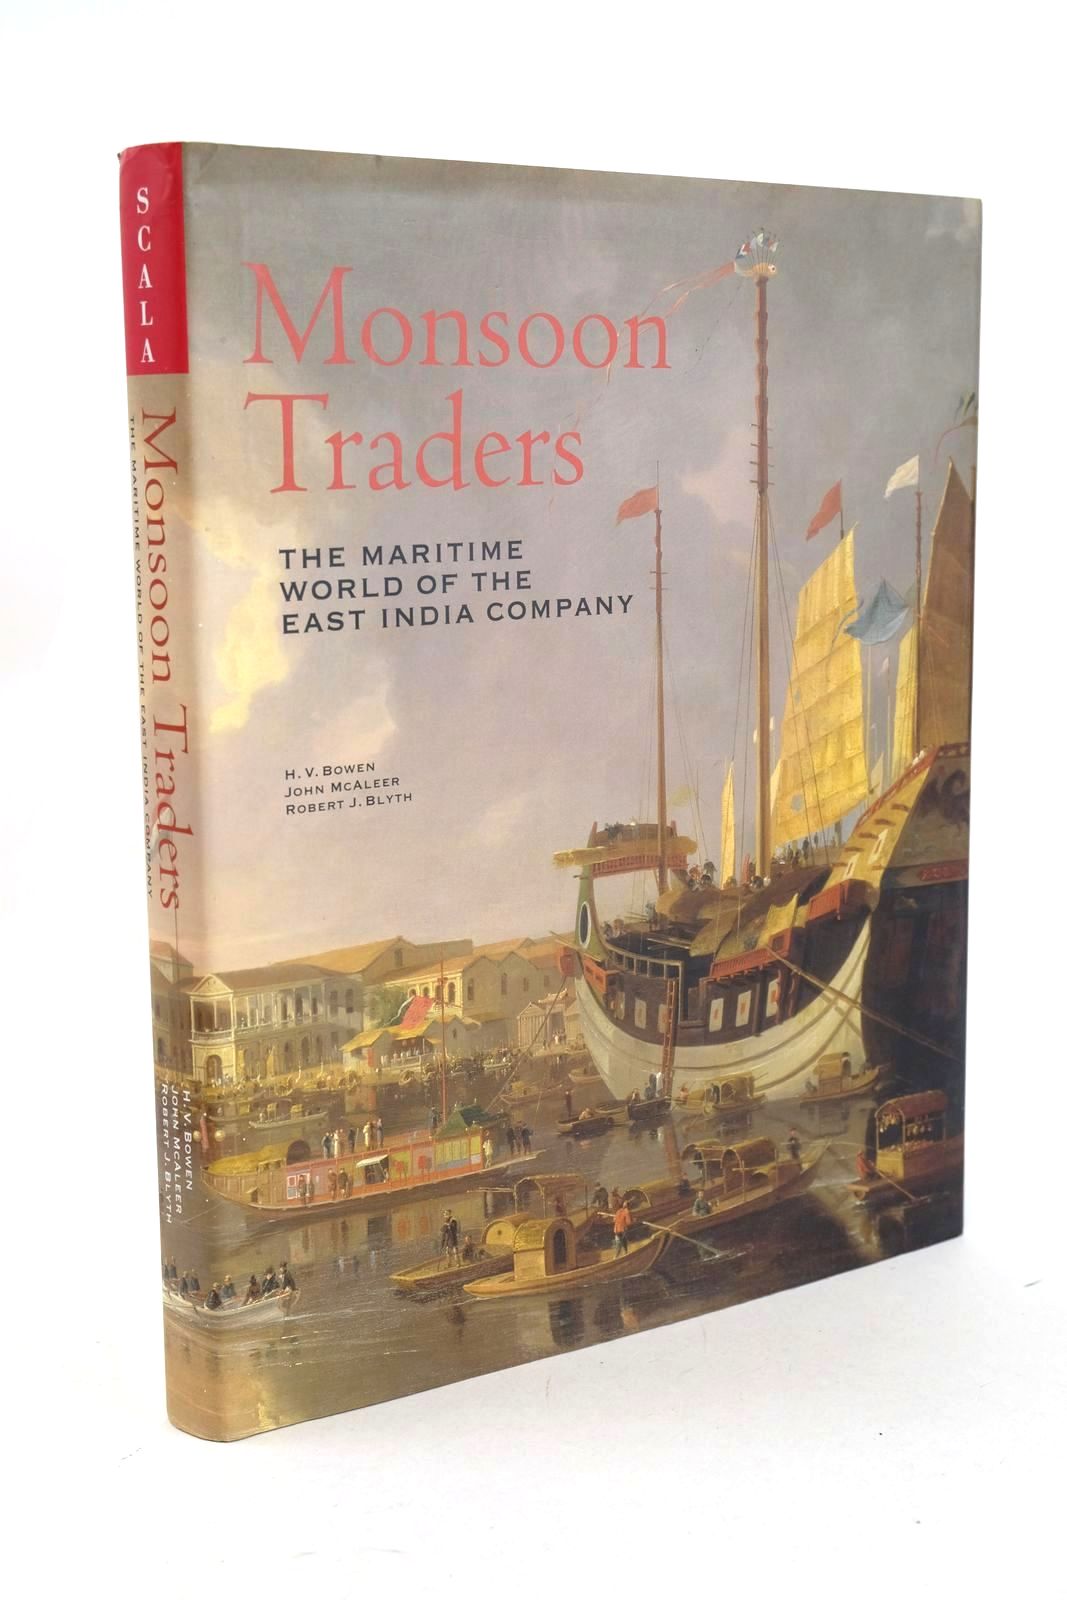 Photo of MONSOON TRADERS: THE MARITIME WORLD OF THE EAST INDIA COMPANY written by Bowen, H.V. McAleer, John Blyth, Robert J. published by Scala Publishers (STOCK CODE: 1326799)  for sale by Stella & Rose's Books